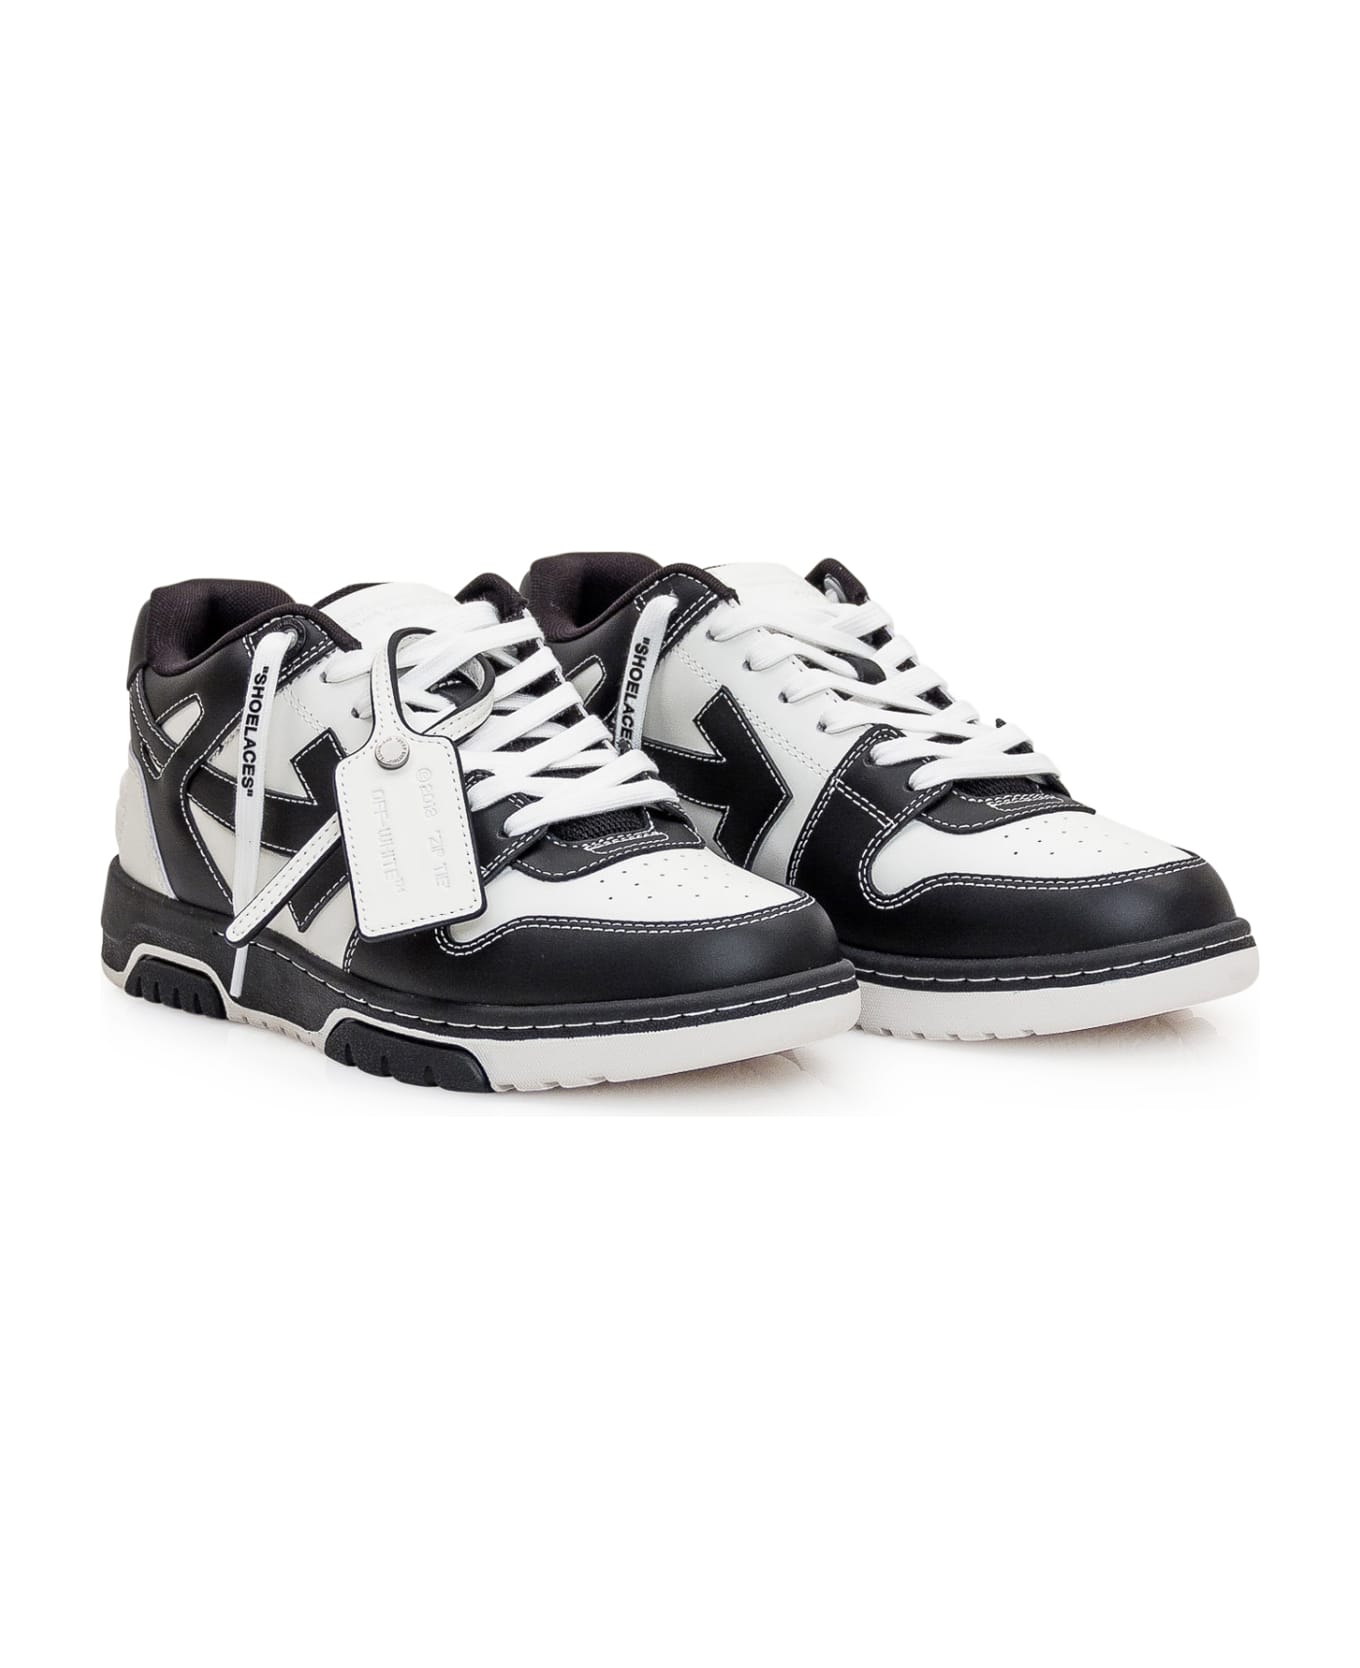 Off-White Out Of Office Sneaker - Black White